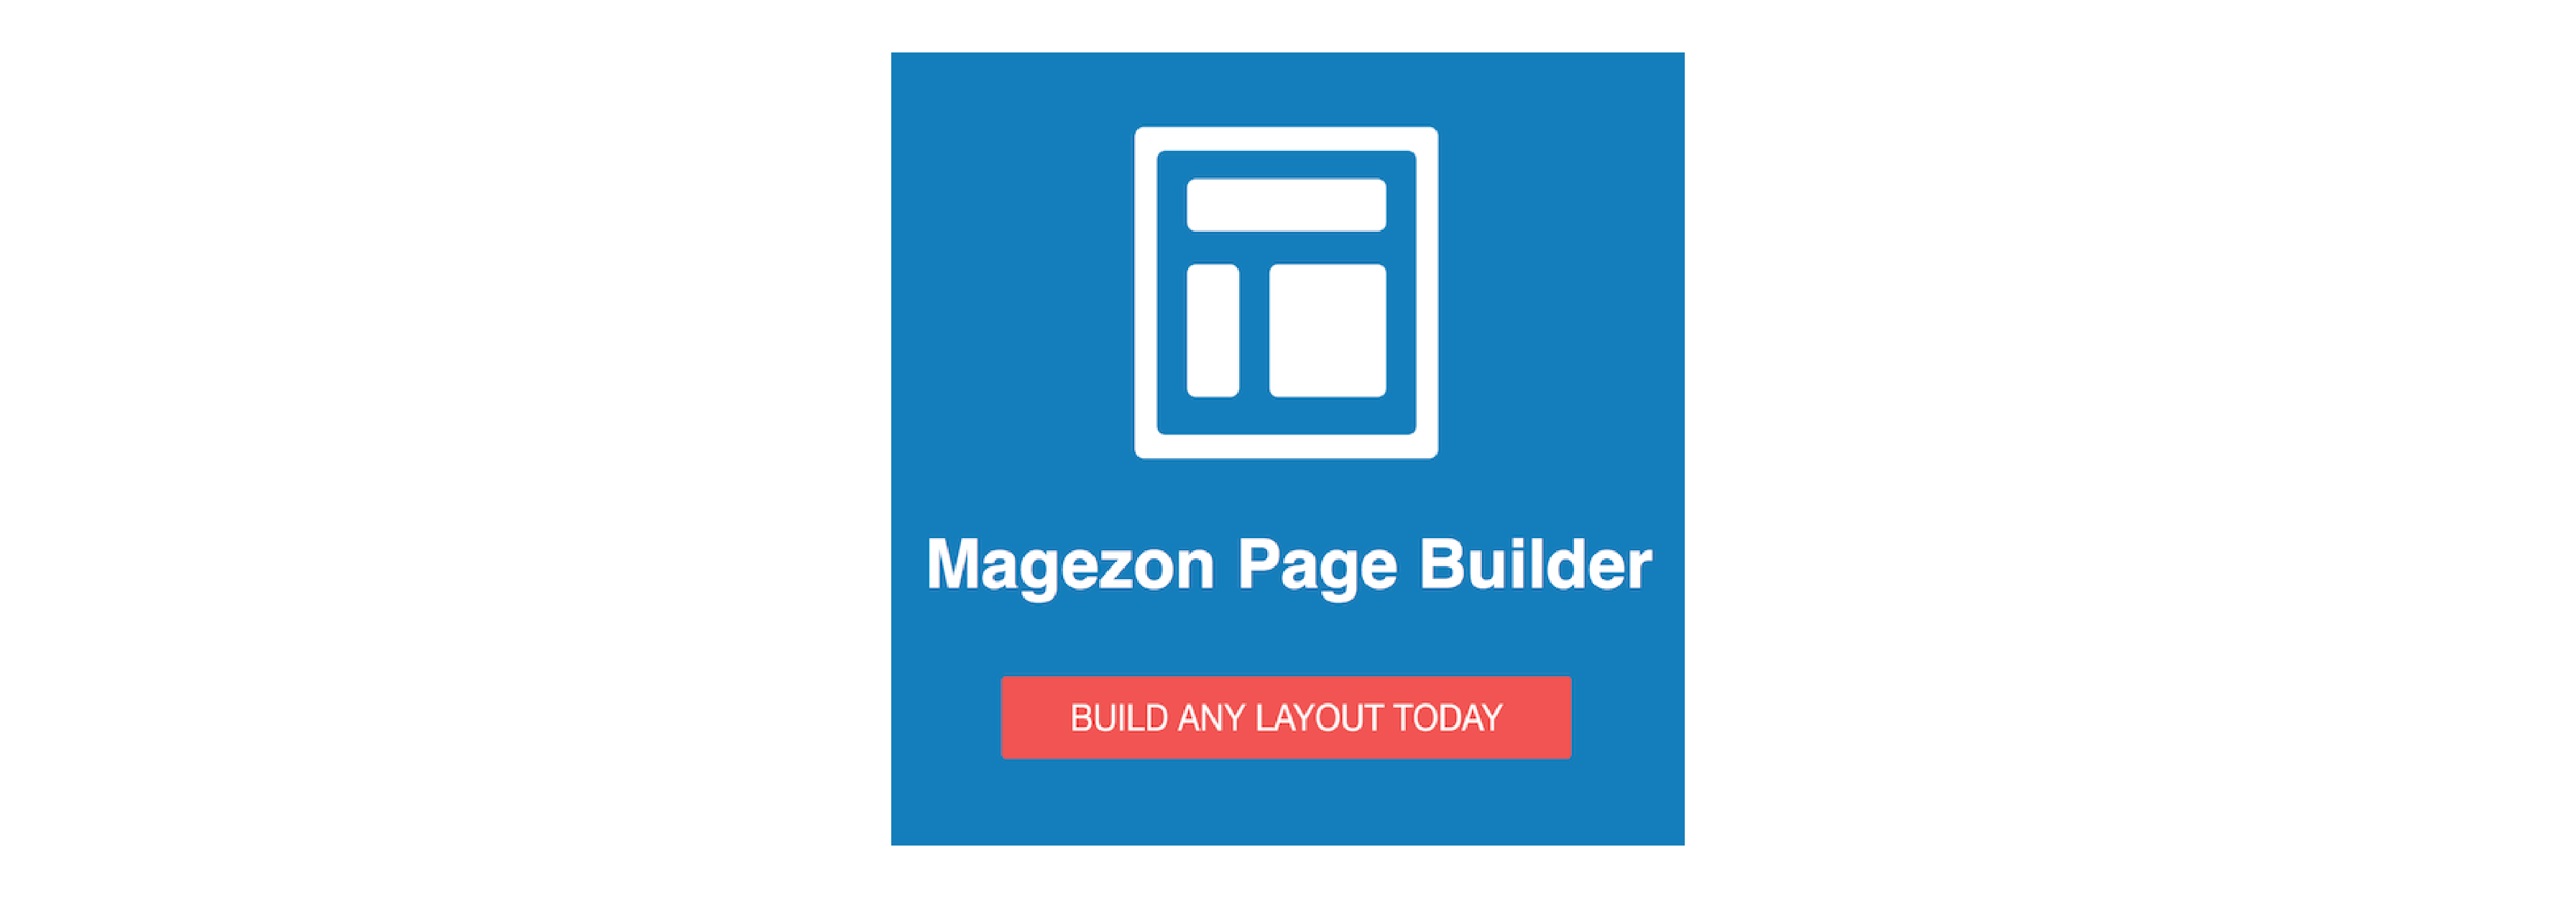 Magezon Page Builder Extension for Magento Online Stores